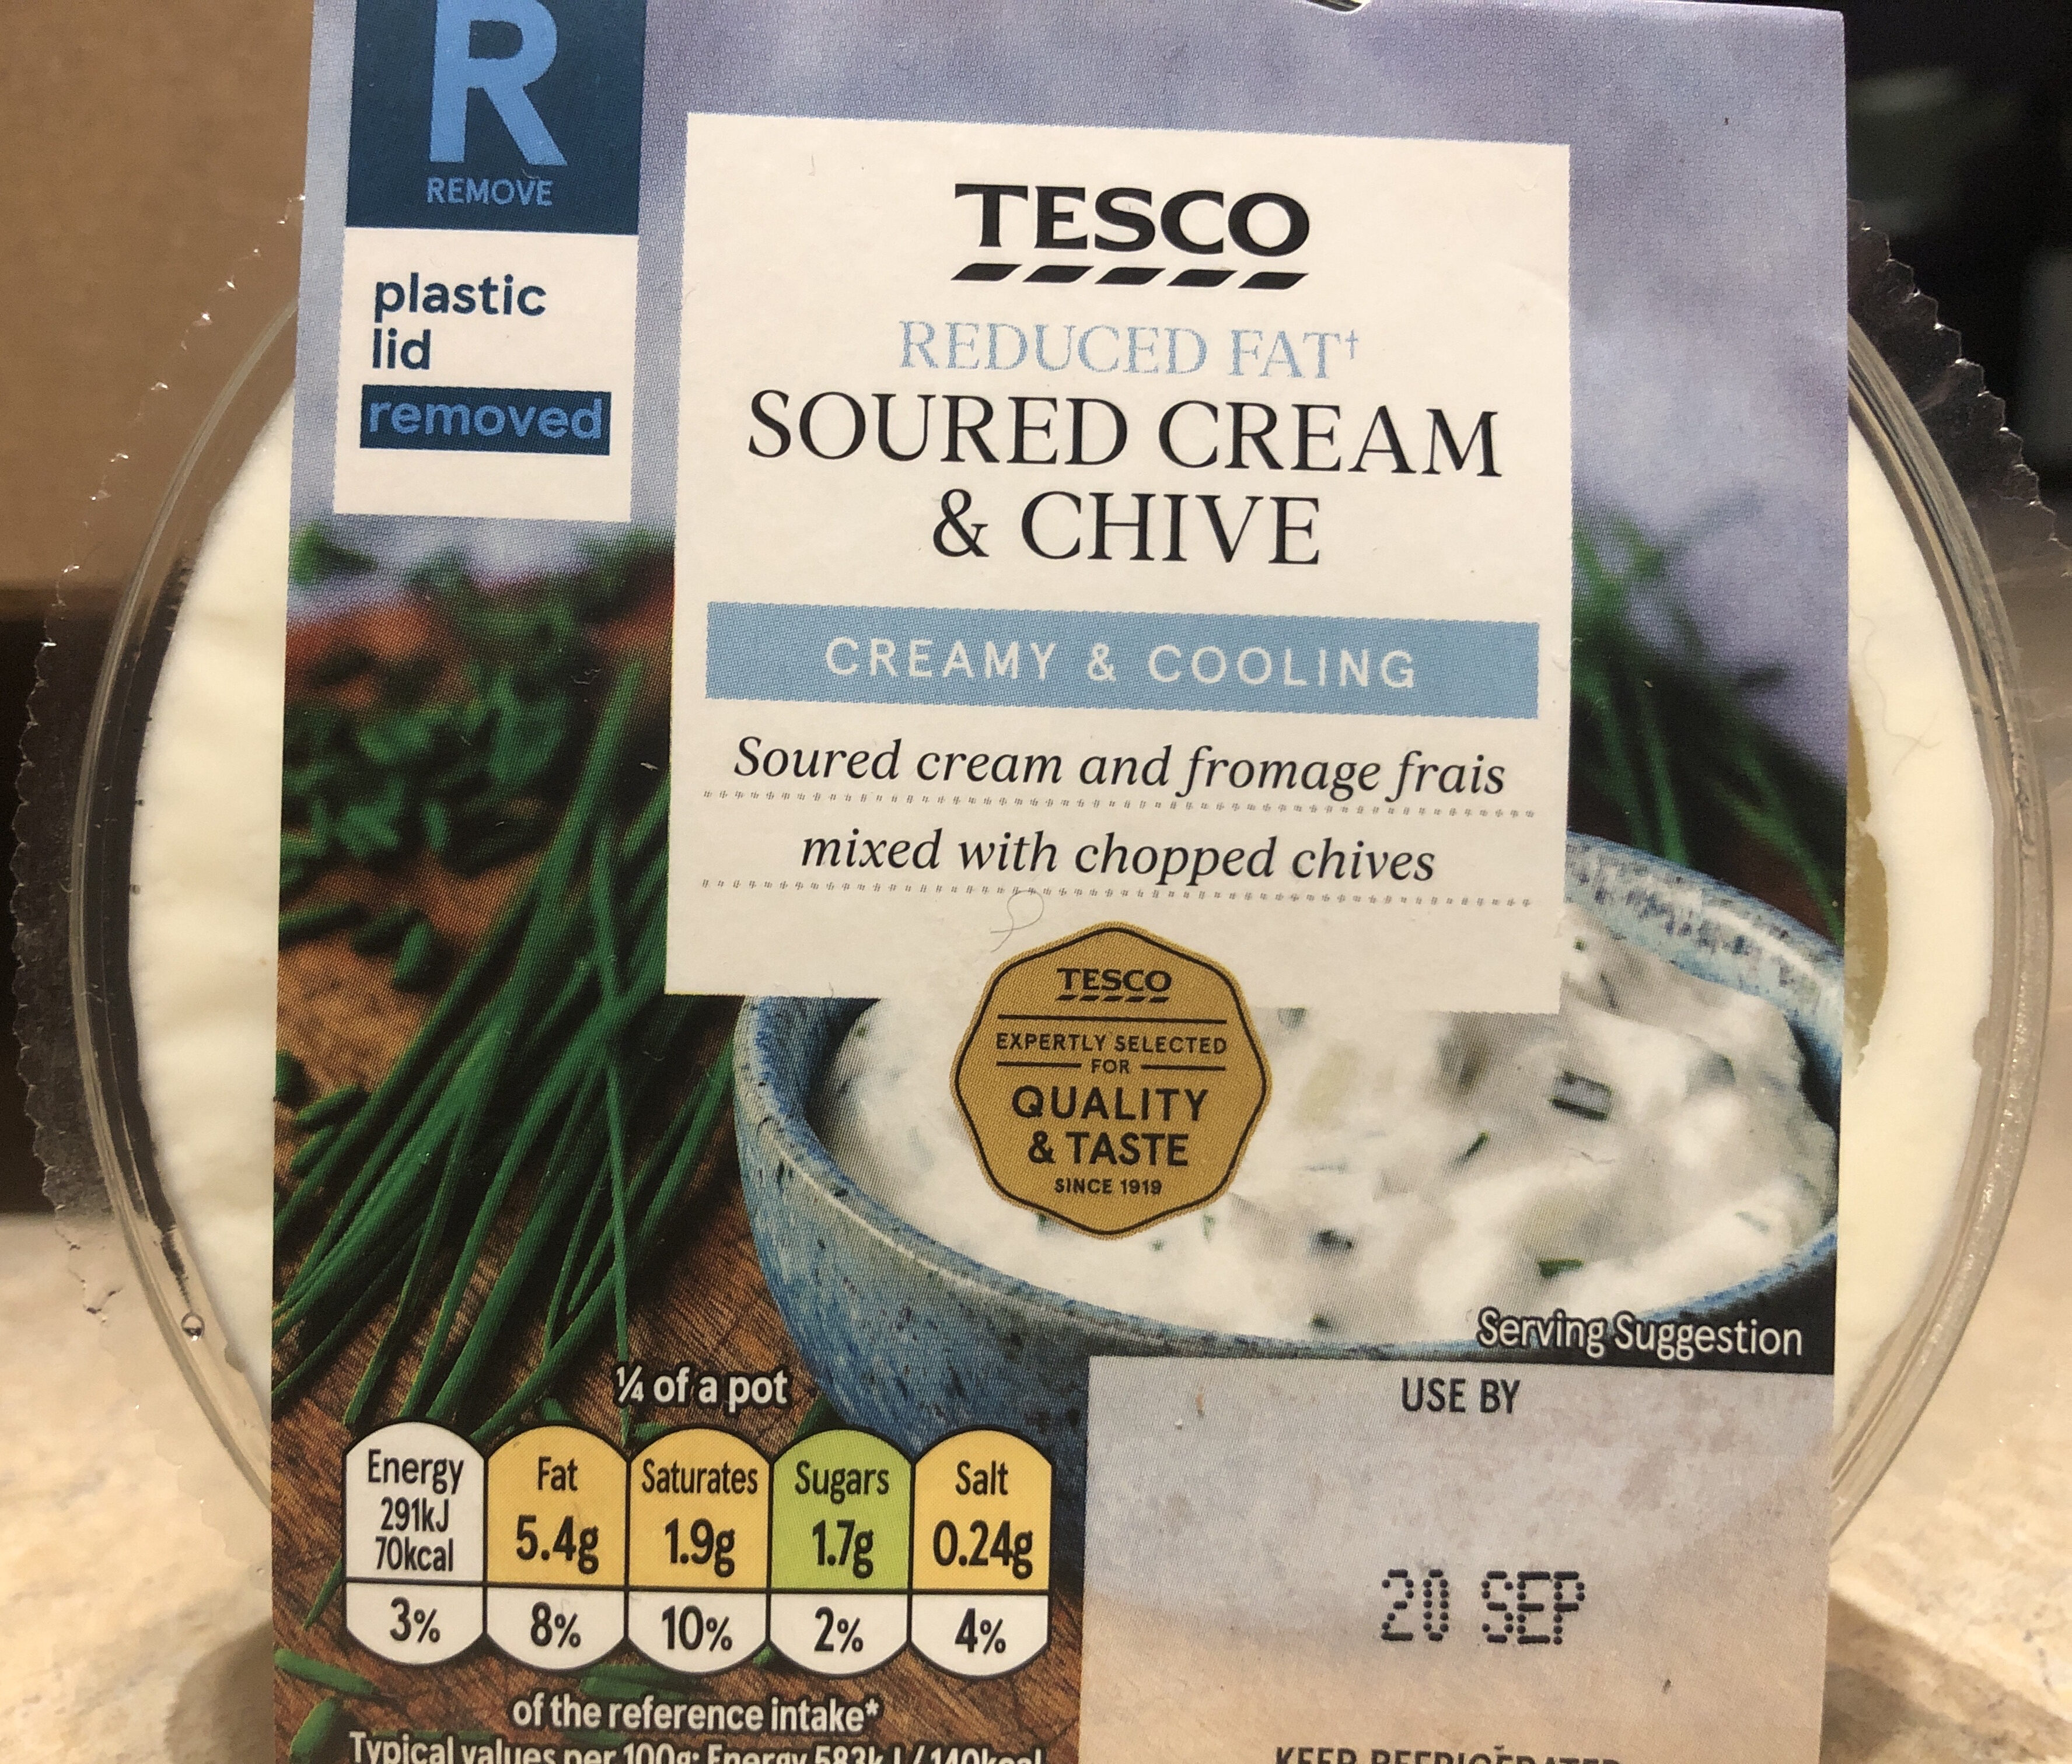 Reduced fat soured cream and chive - Product